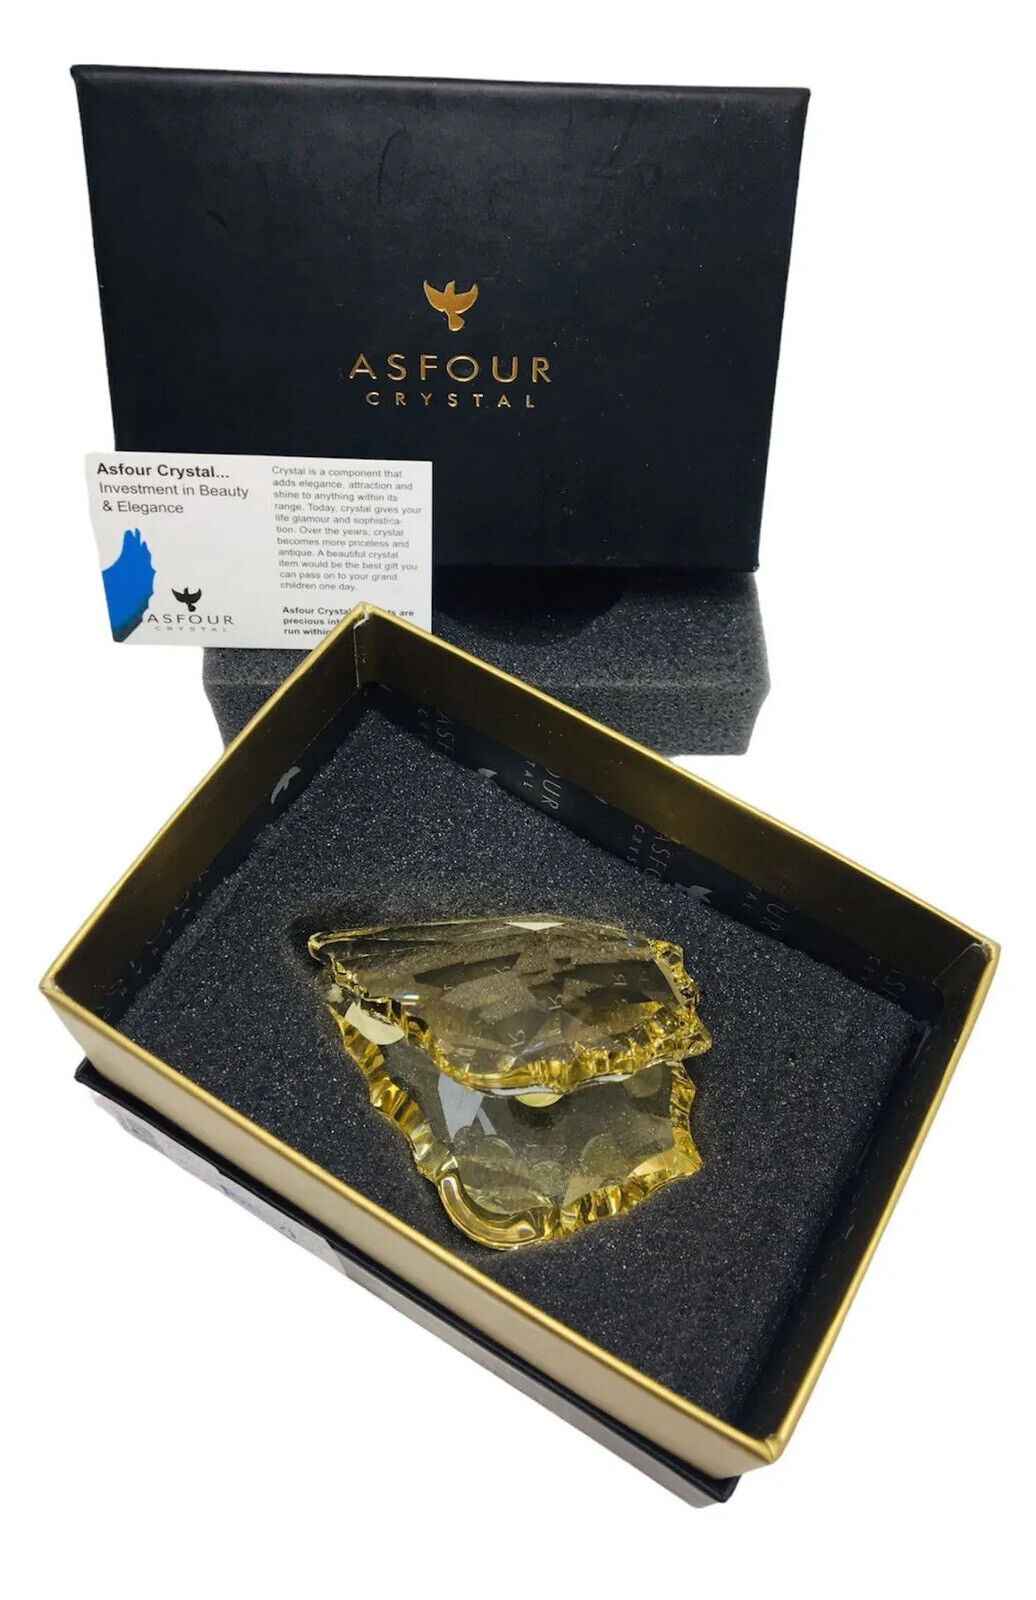 Original Pure Crystal shell, Golden shade, Asfour Crystal Stamped